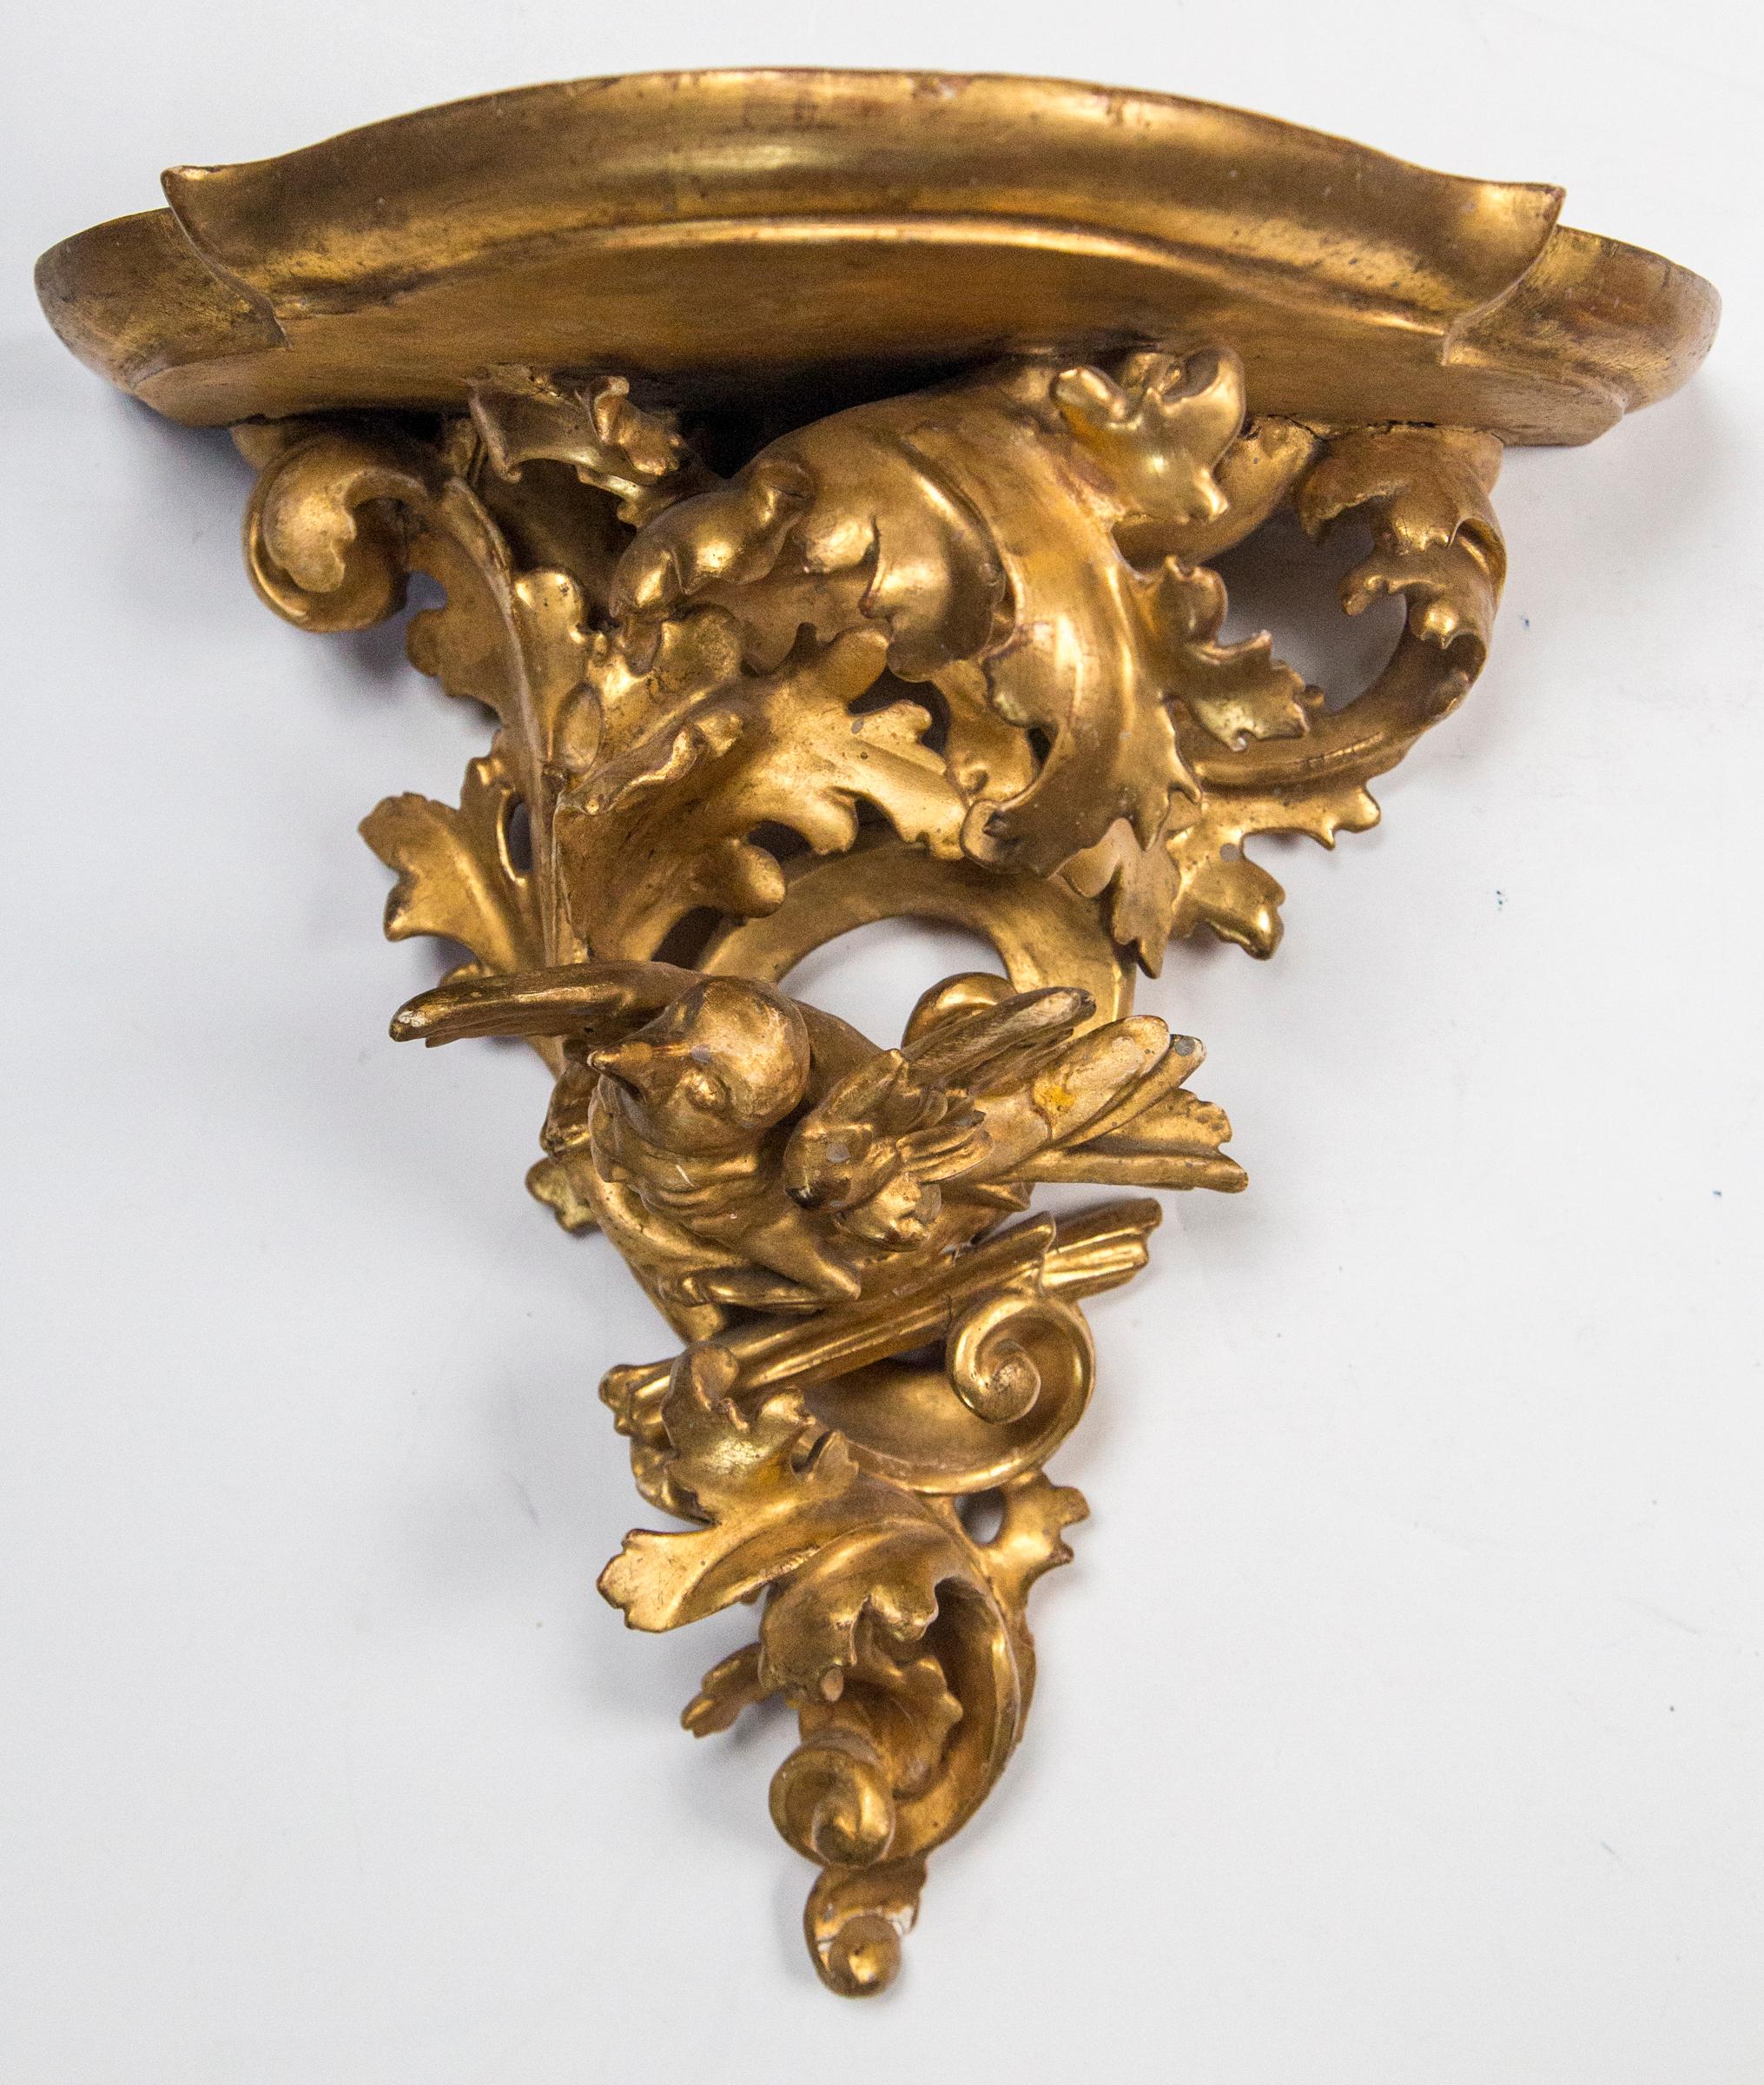 In the Rococo style of the late 18th, early 19th century. Each with a central figure of a bird, wings out, beak open and sitting within its nest. They are surrounded by foliate scrolls and leaves. One bird faces left while the other faces to the